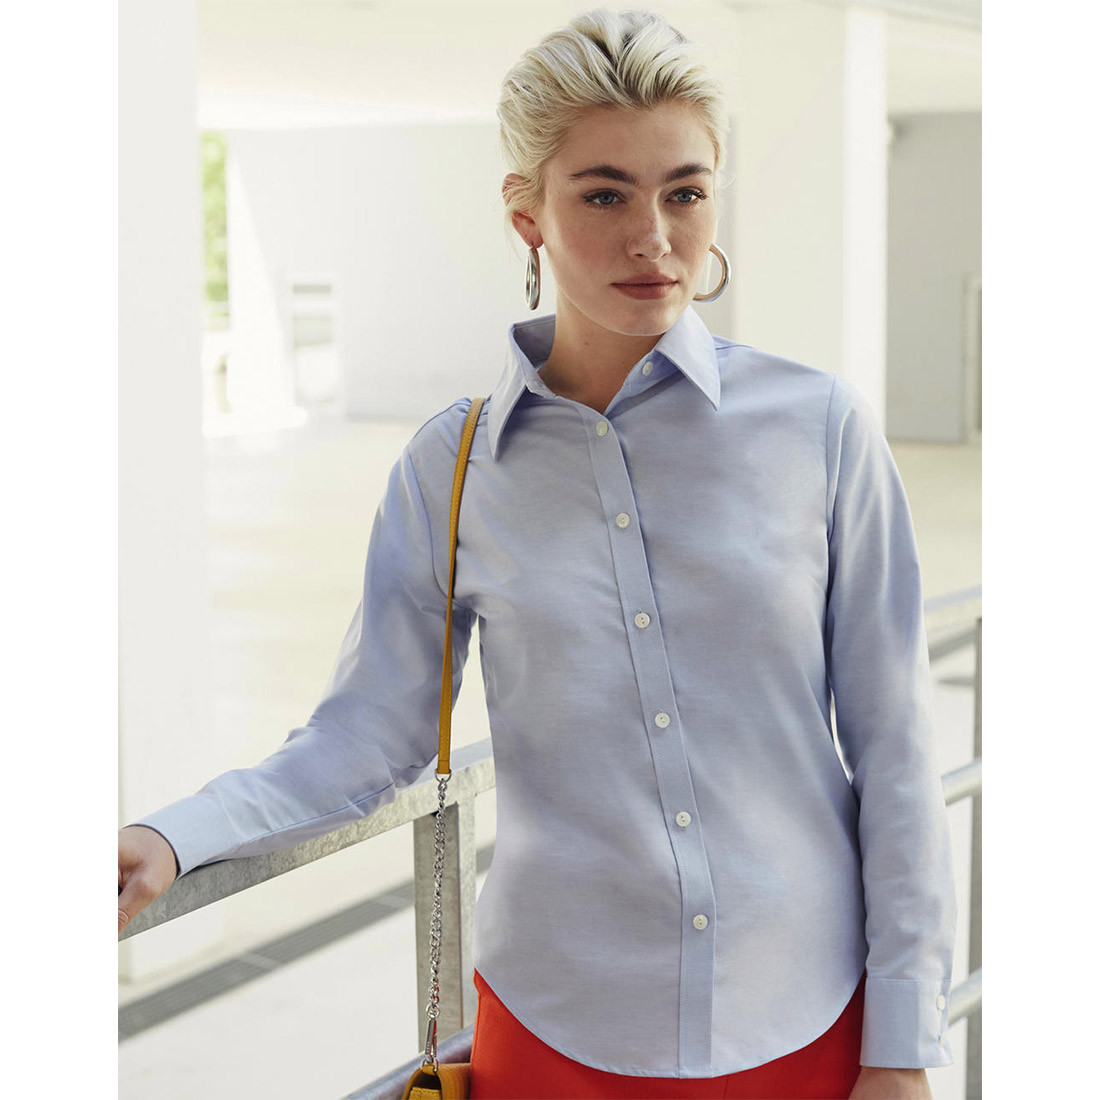 Lady-Fit Long Sleeve Oxford Shirt - Arbeitskleidung